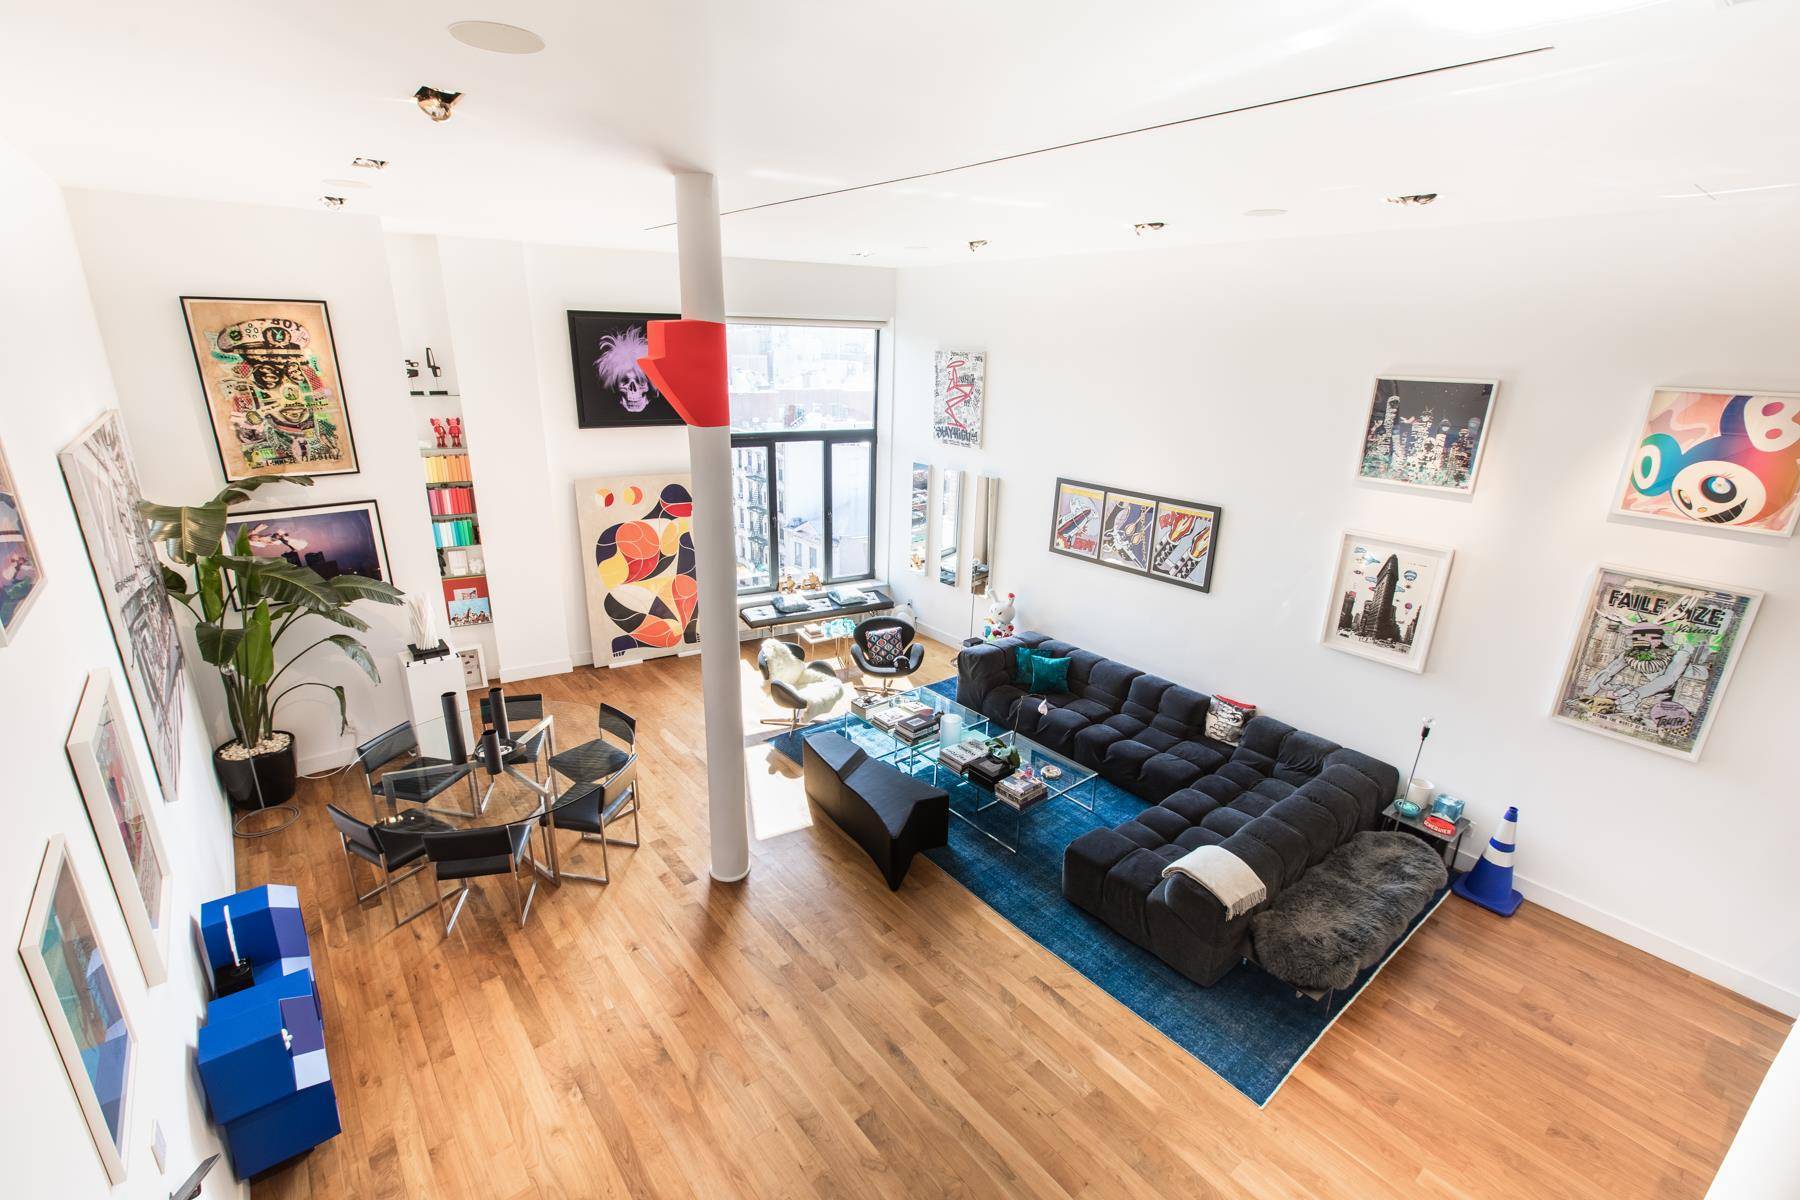 Penthouse Condo Loft in NolitaOne of a kind space, newly renovated by visionary NYC Designer.